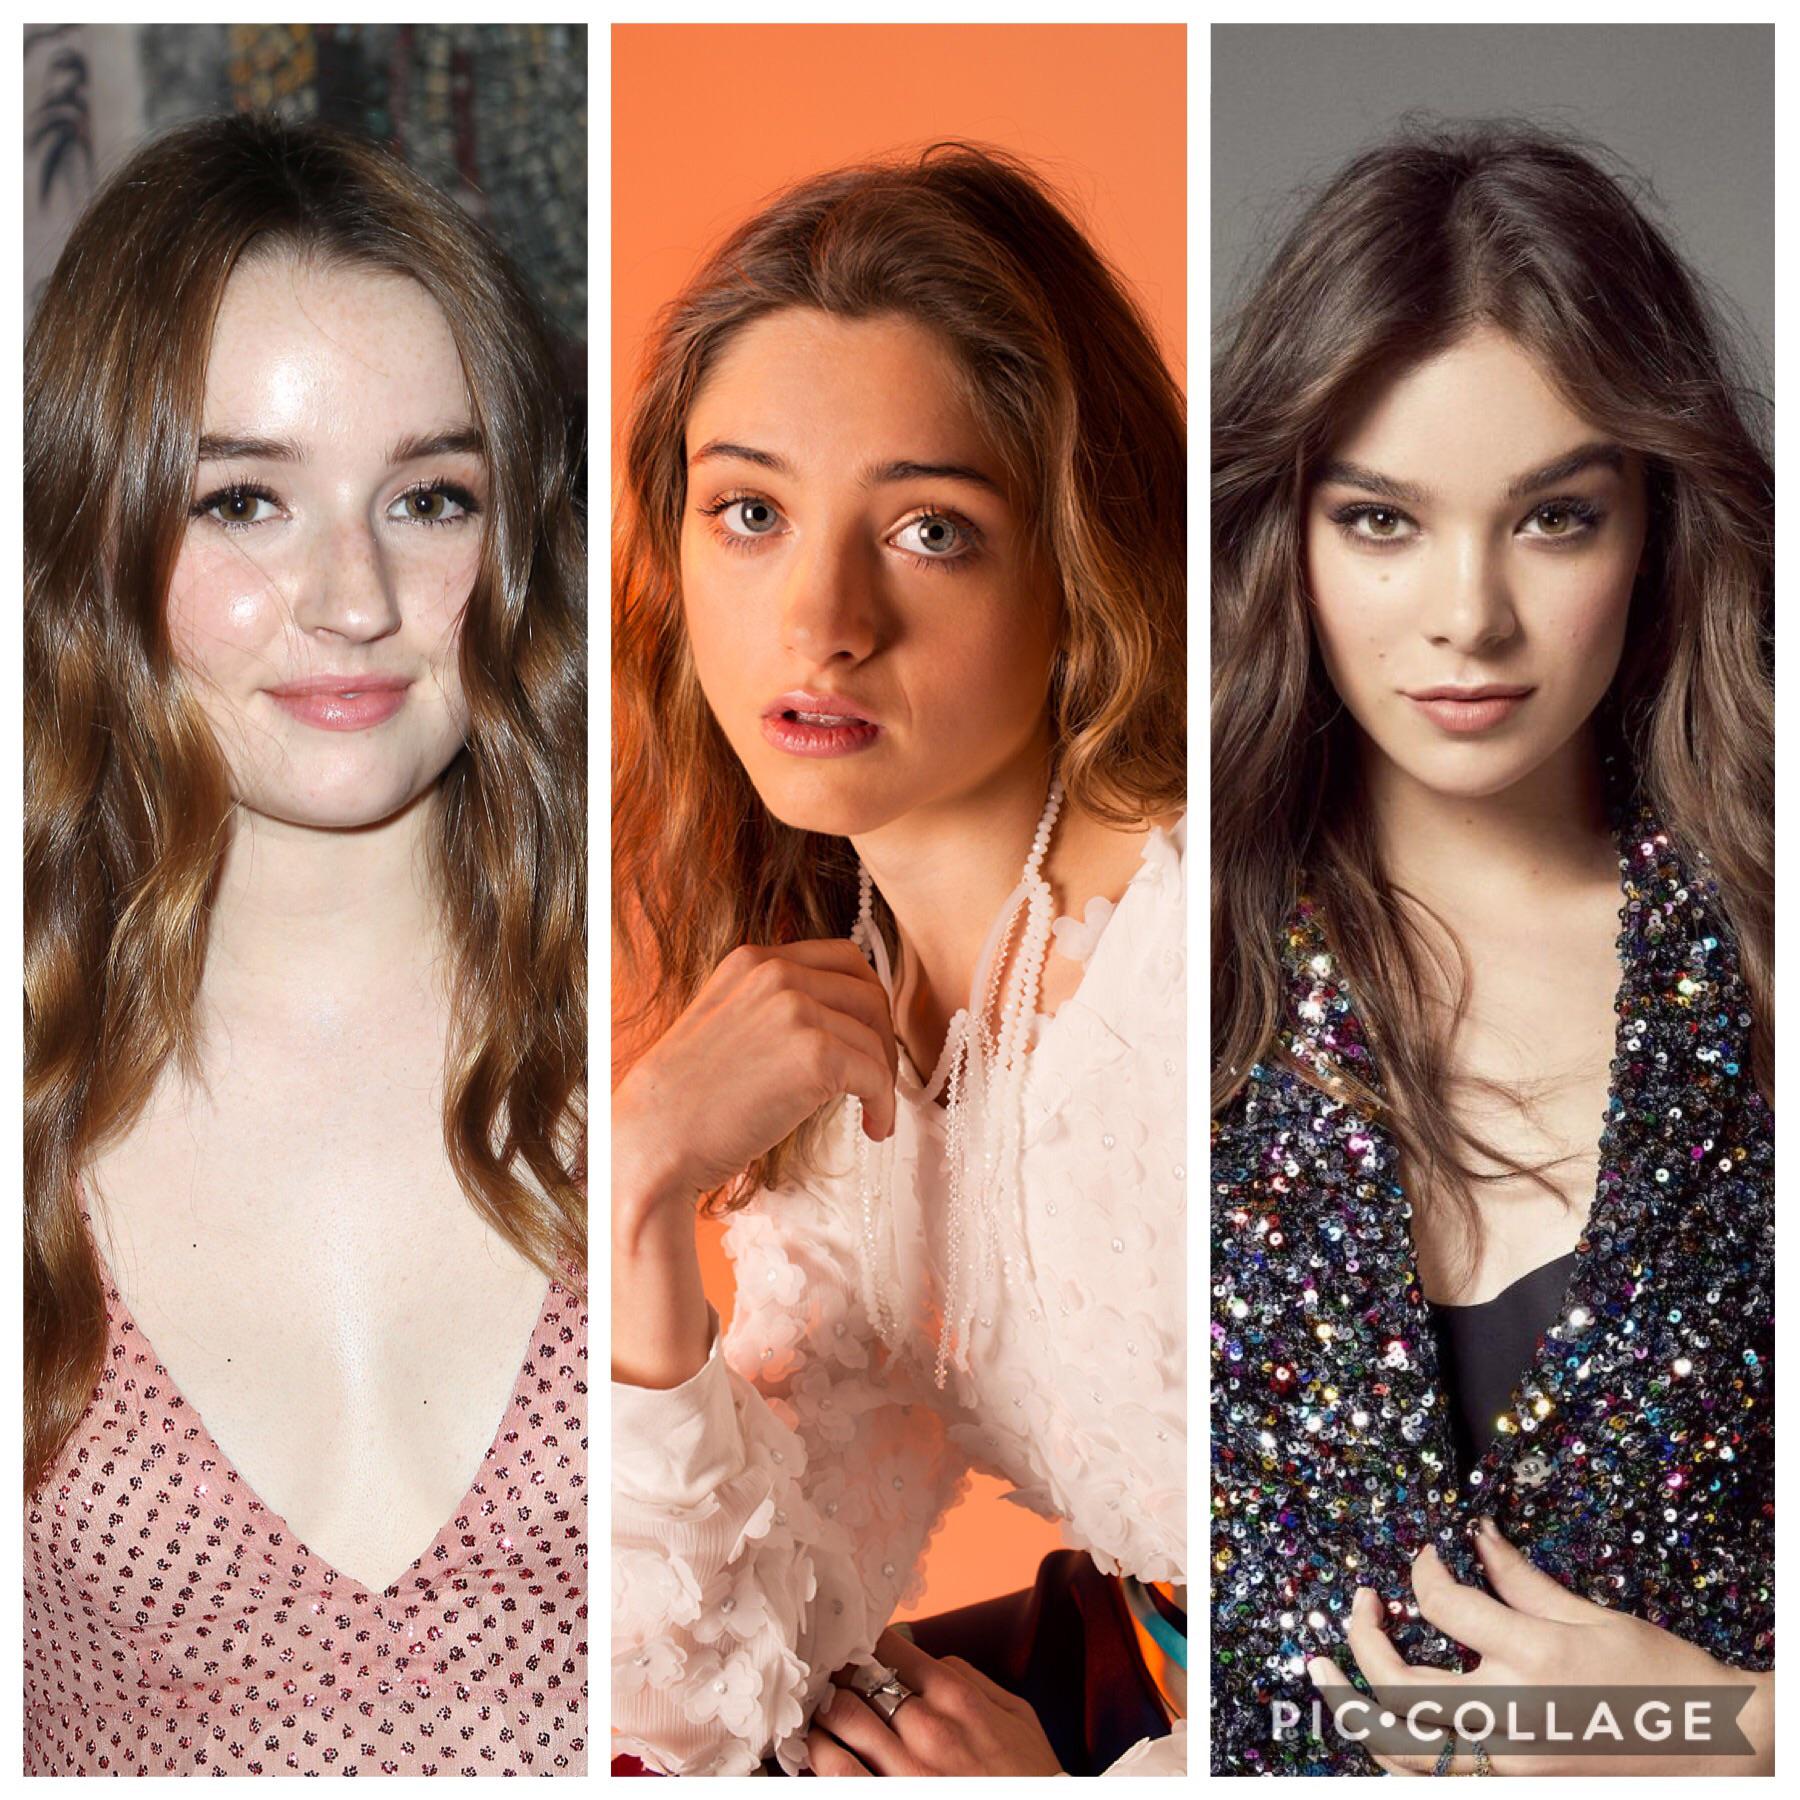 Would You Rather Pussyfuck Kaitlyn Dever Get A Sensual Blowjob From Natalia Dyer Or Pound